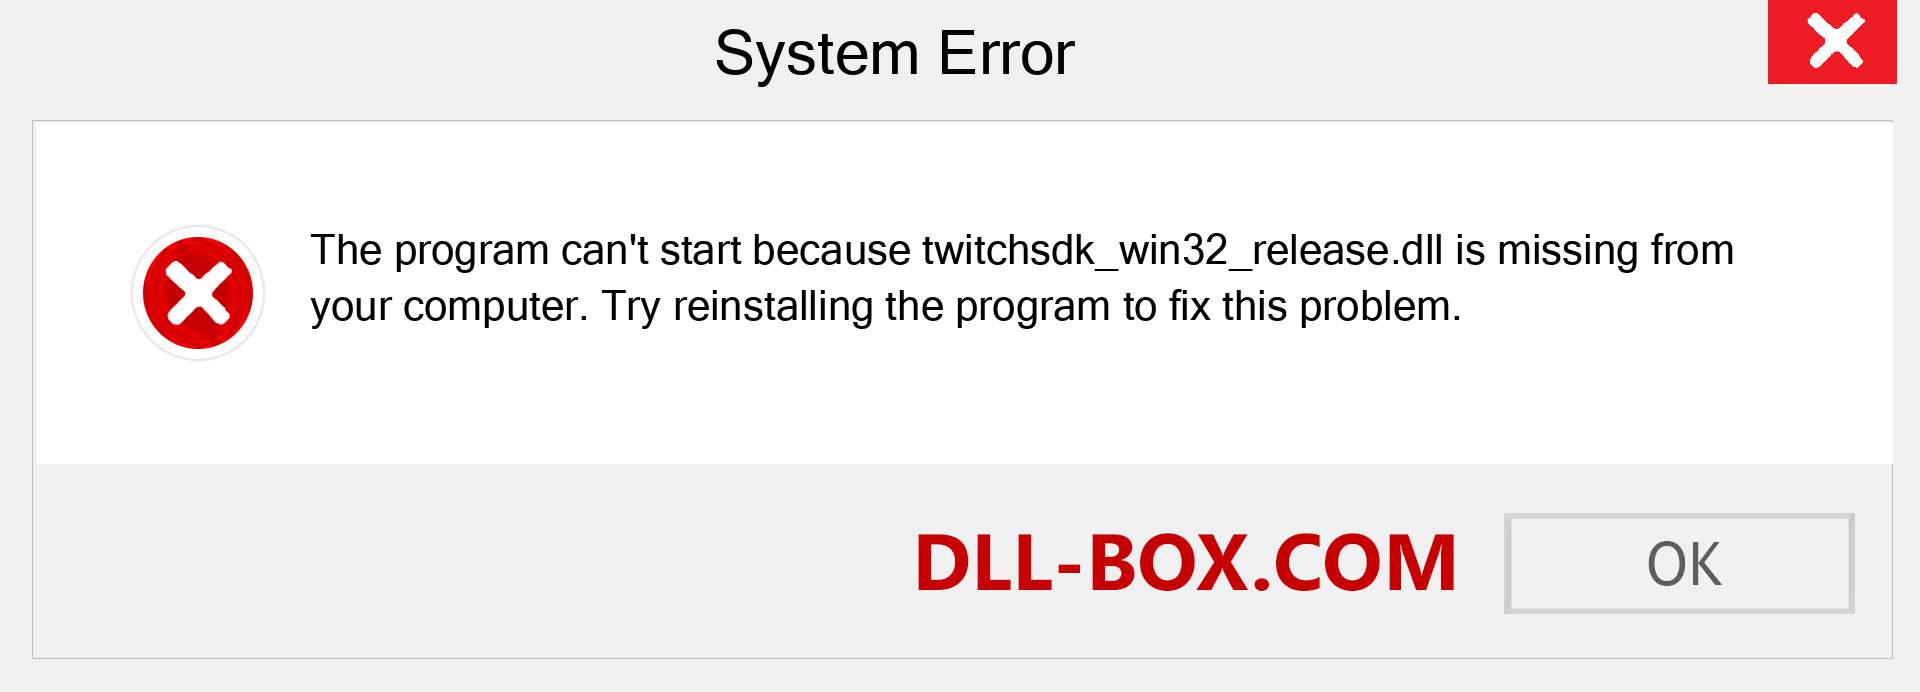  twitchsdk_win32_release.dll file is missing?. Download for Windows 7, 8, 10 - Fix  twitchsdk_win32_release dll Missing Error on Windows, photos, images